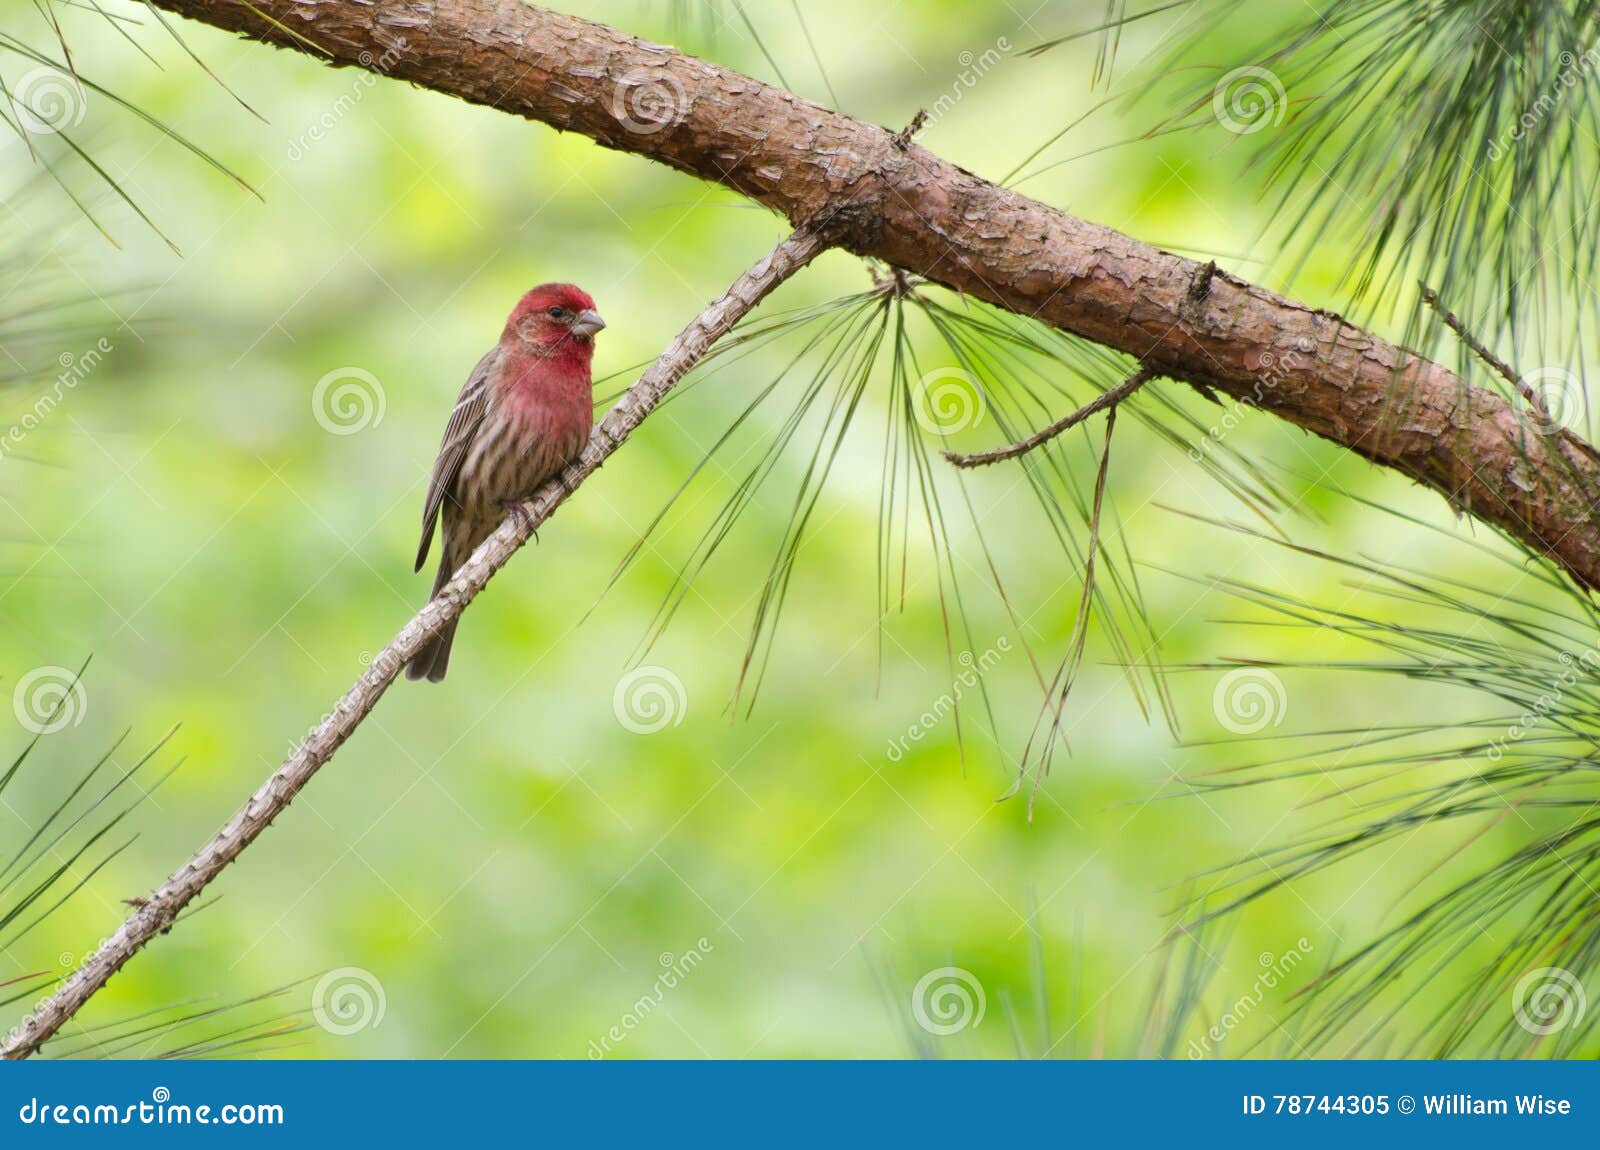 Male House Finch Stock Image Image Of Feeding Duck 78744305